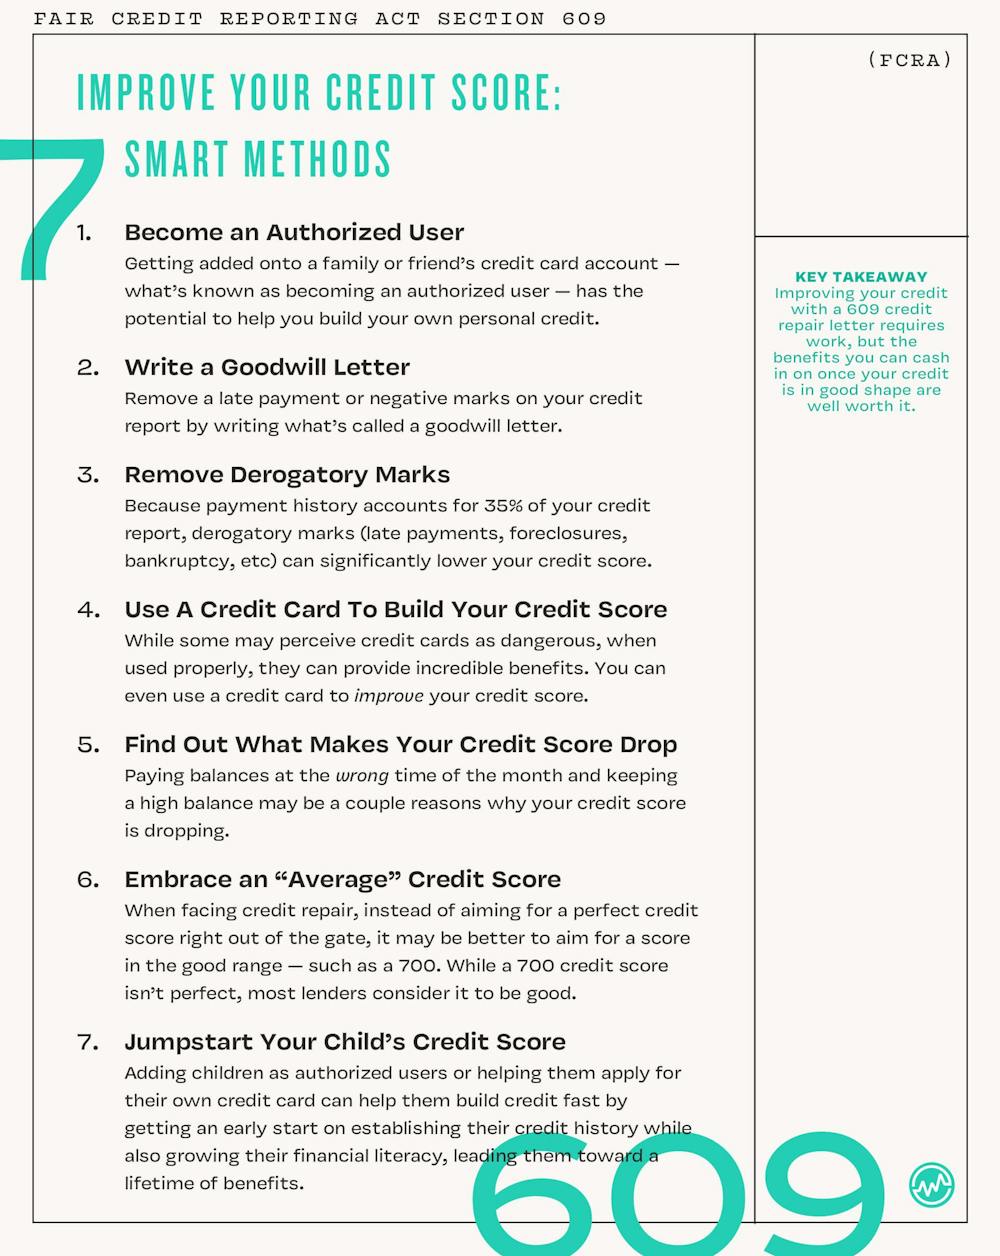 7 Ways to improve your credit score